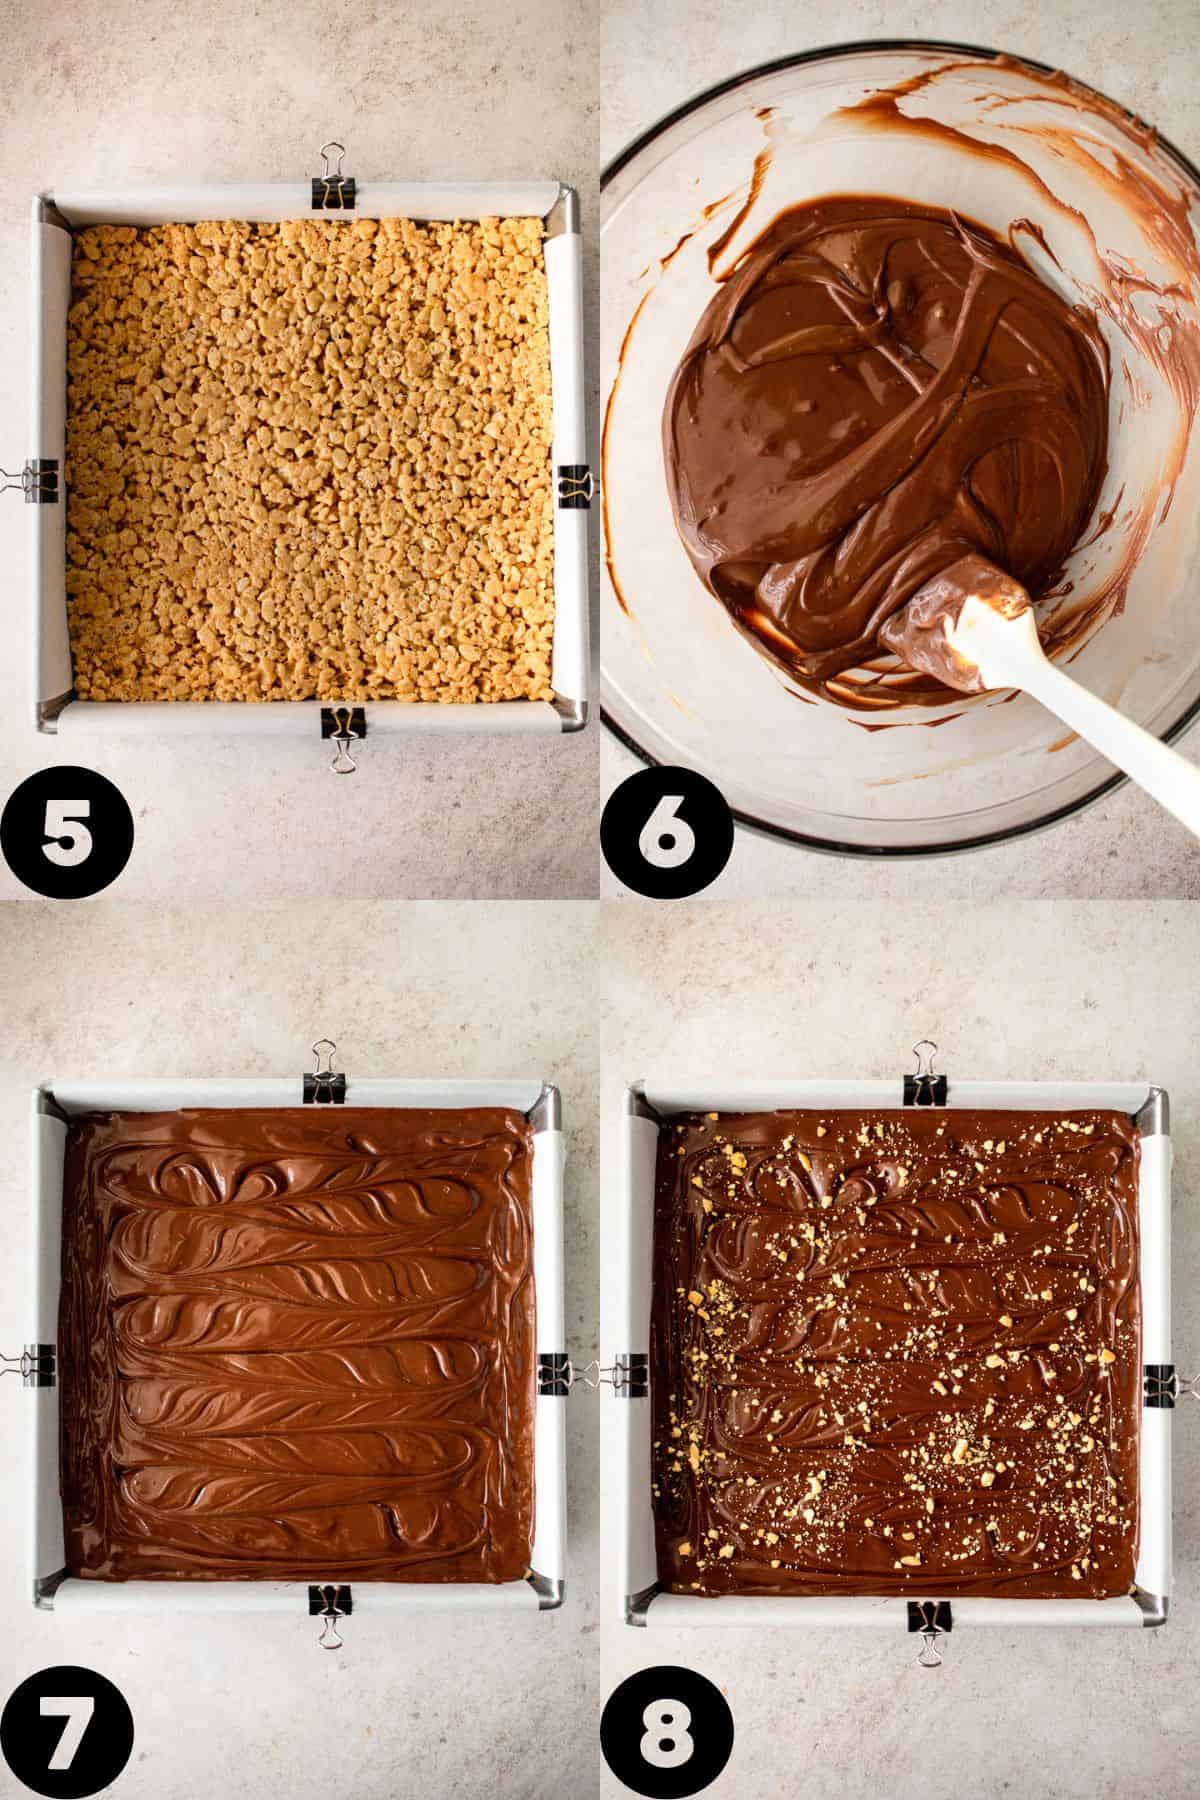 step by step recipe instructions, rice krispie treats in pan, chocolate peanut butter topping, sprinkled peanuts